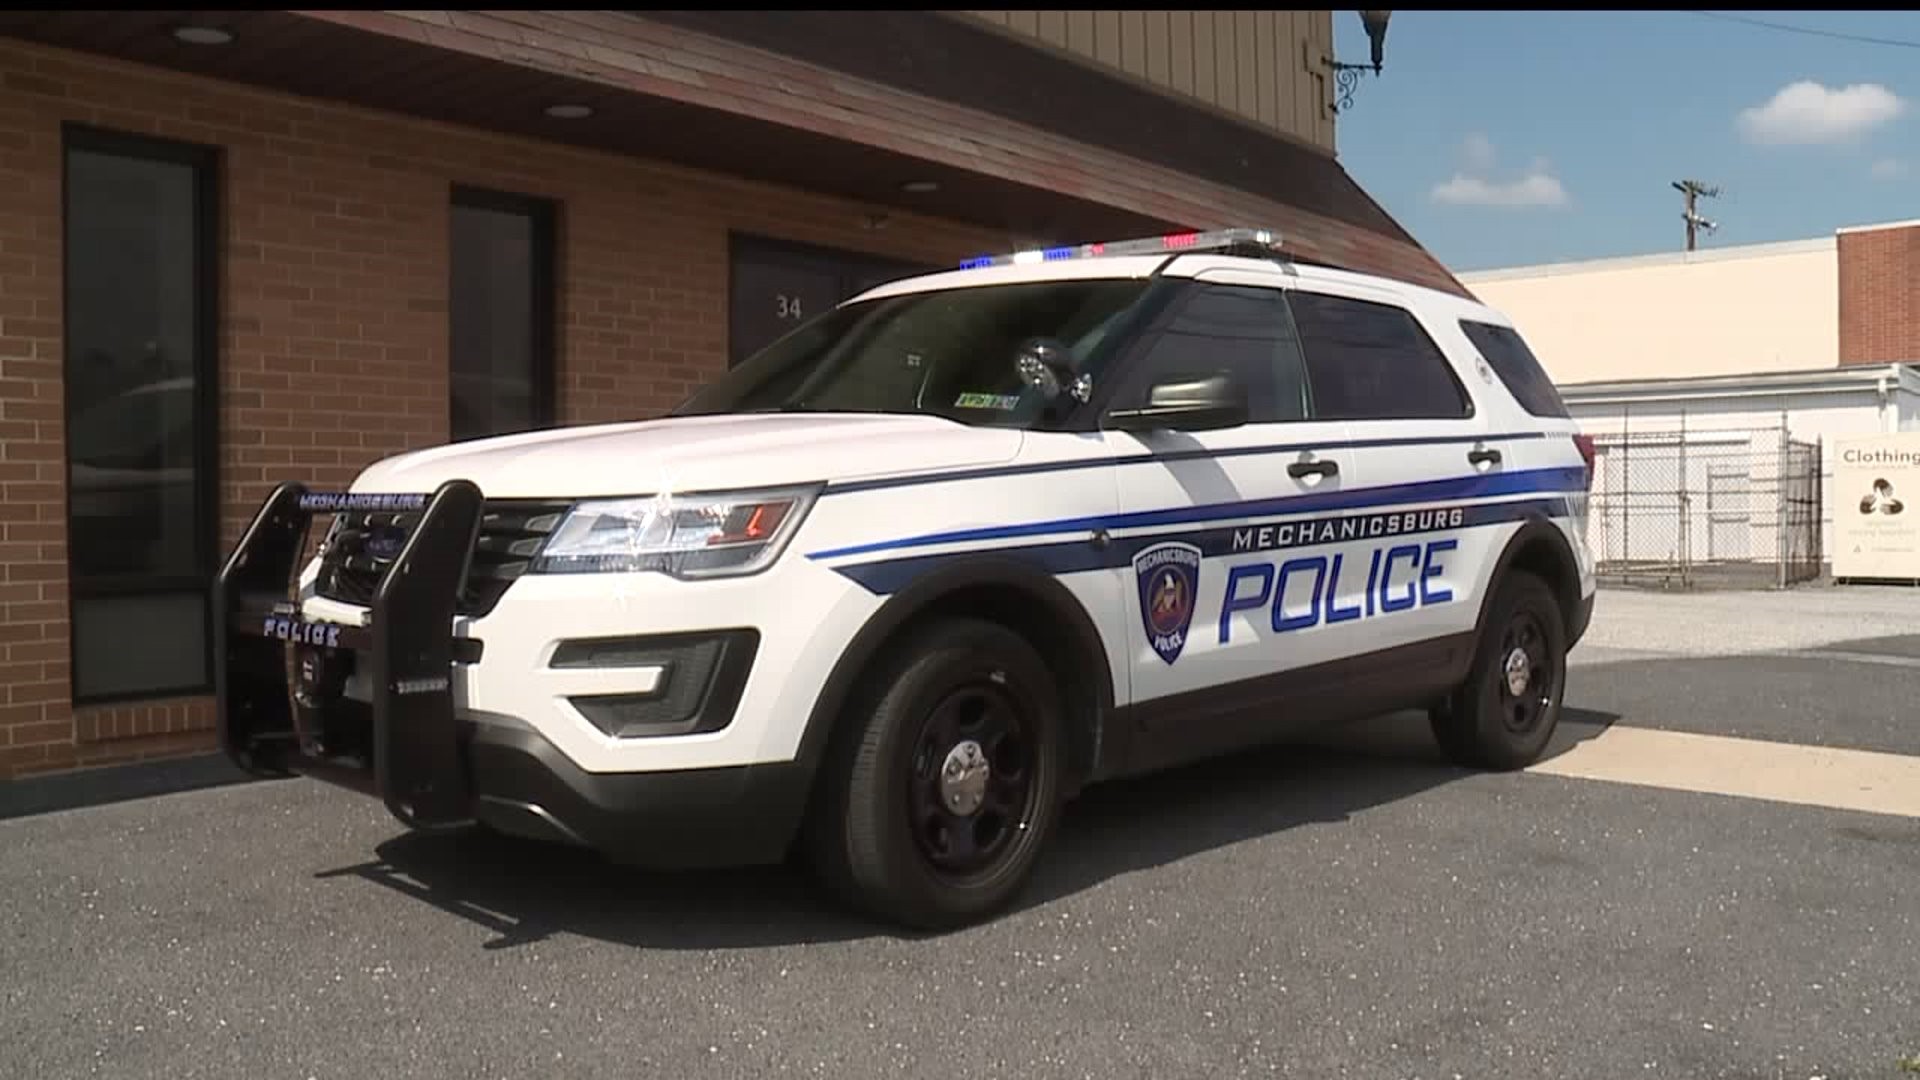 Mechanicsburg Police taking extra precautions following CO exposure in Ford Explorers